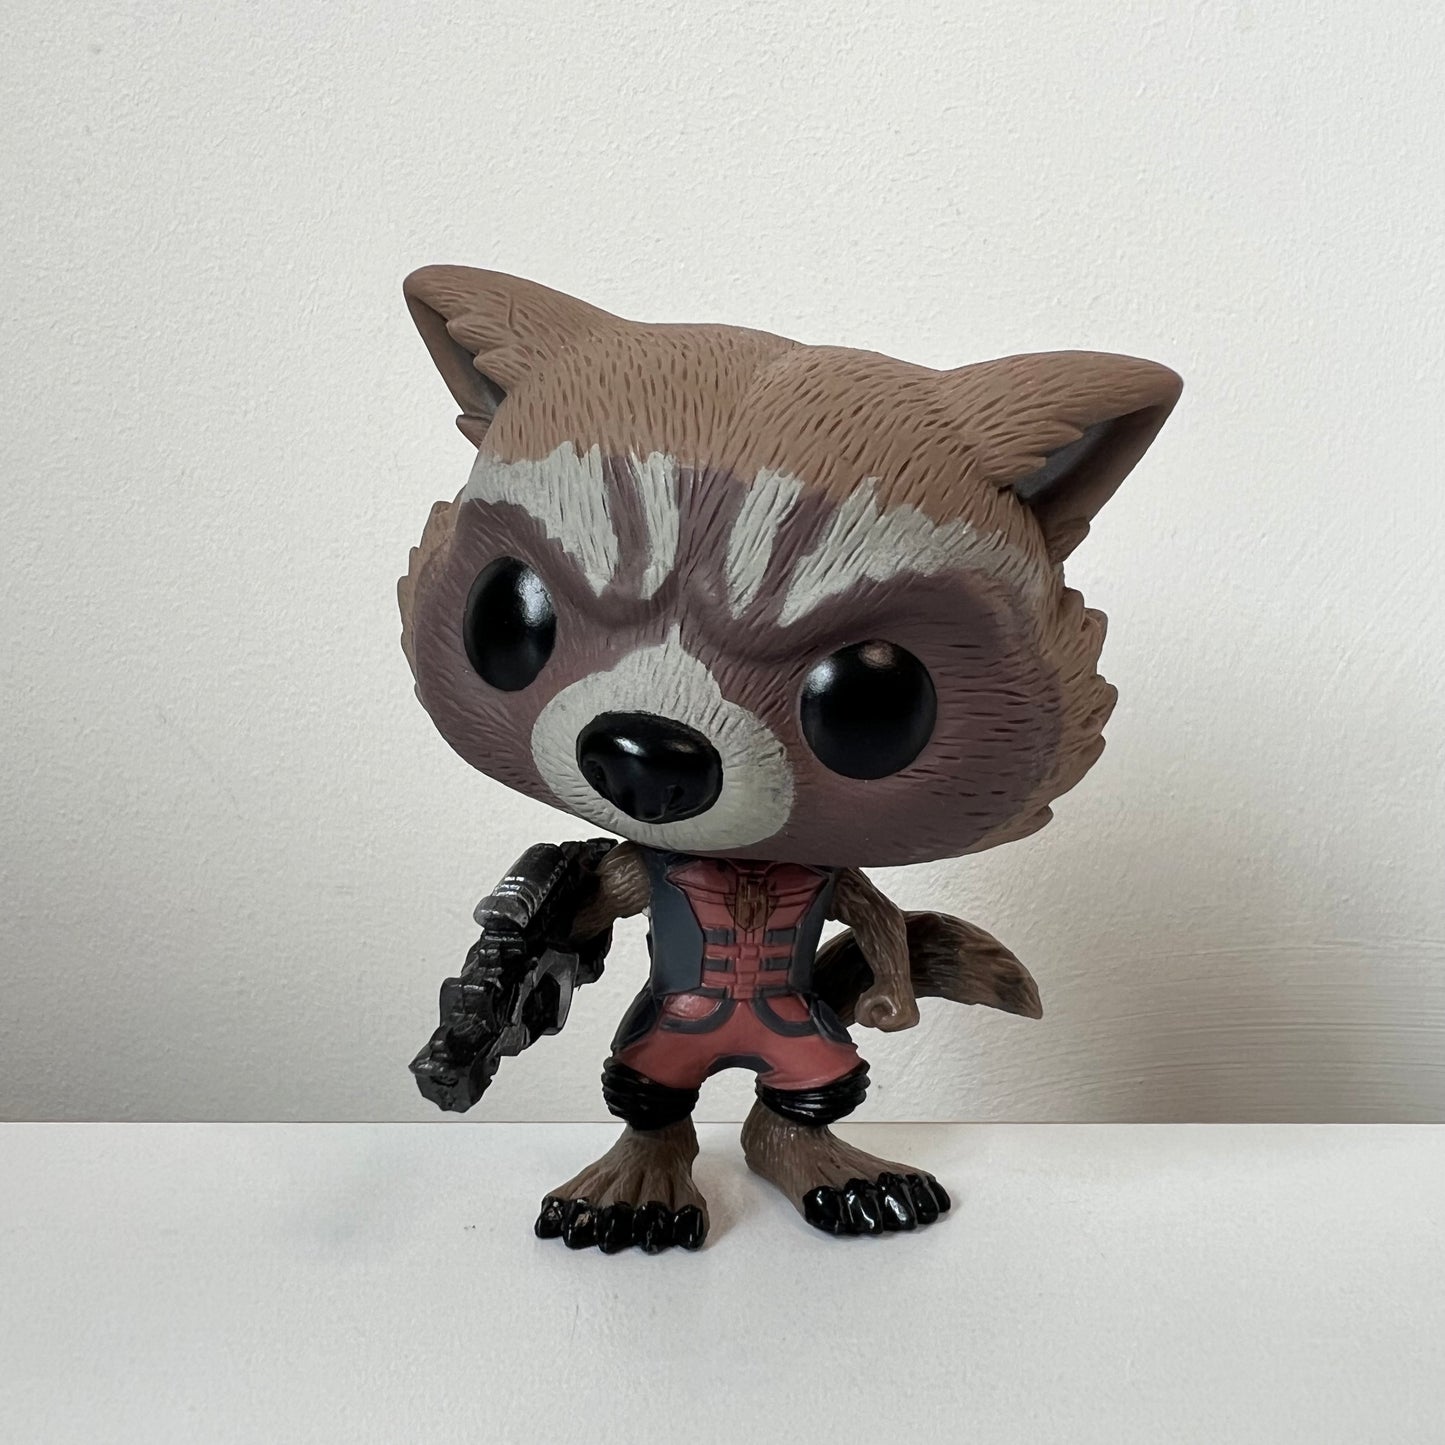 Marvel Guardians of the Galaxy - Rocket Racoon 48 Funko Pop (No Box or Insert Included)